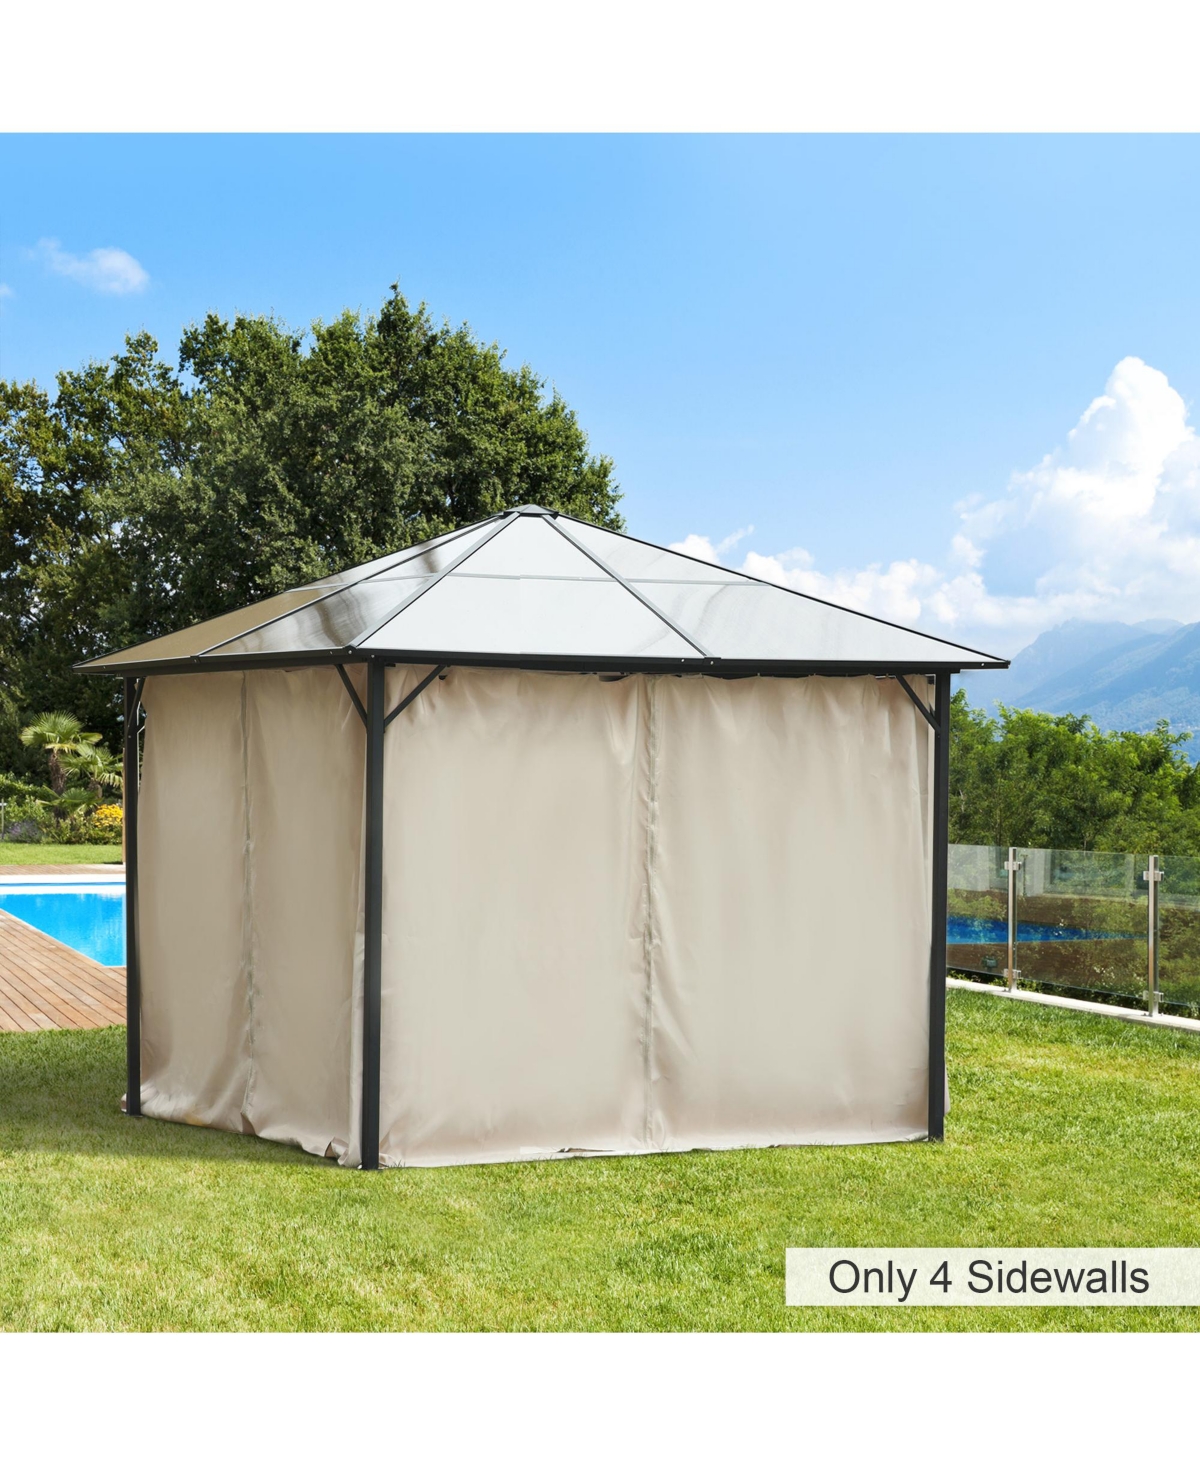 10' x 10' Universal Gazebo Sidewall Set with Panels, Hooks and C-Rings Included for Pergolas and Cabanas, Beige - Beige/khaki